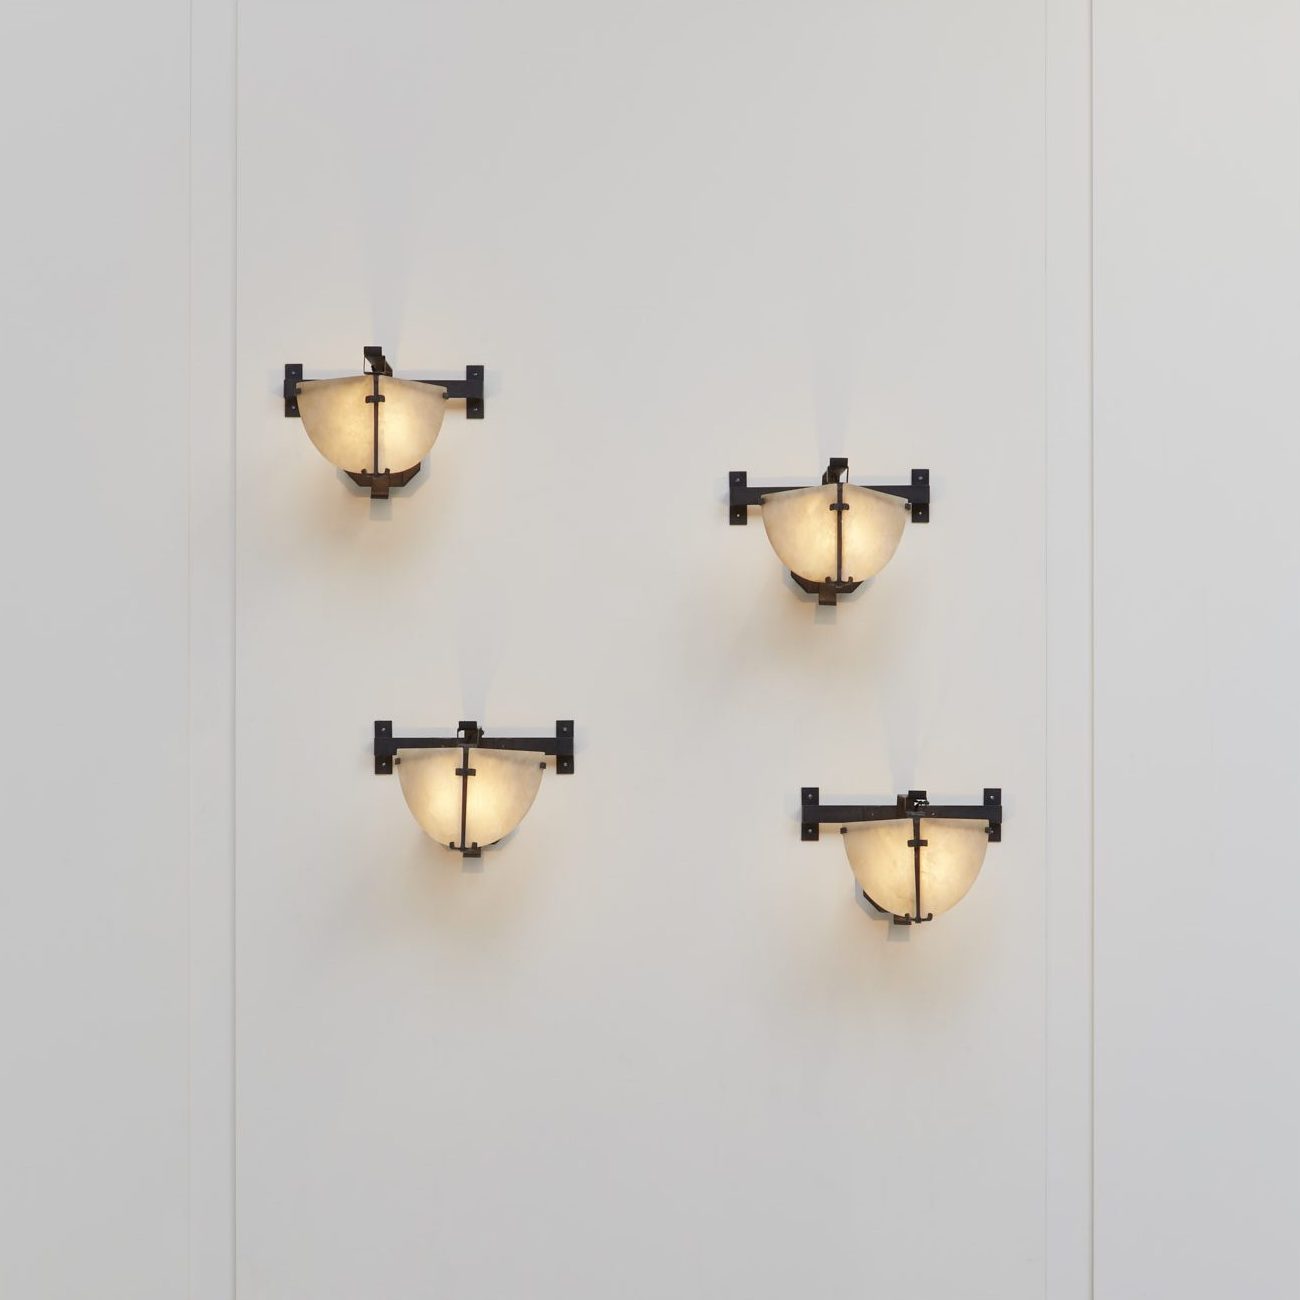 Pair of LP180 wall lights entitled “Masque“